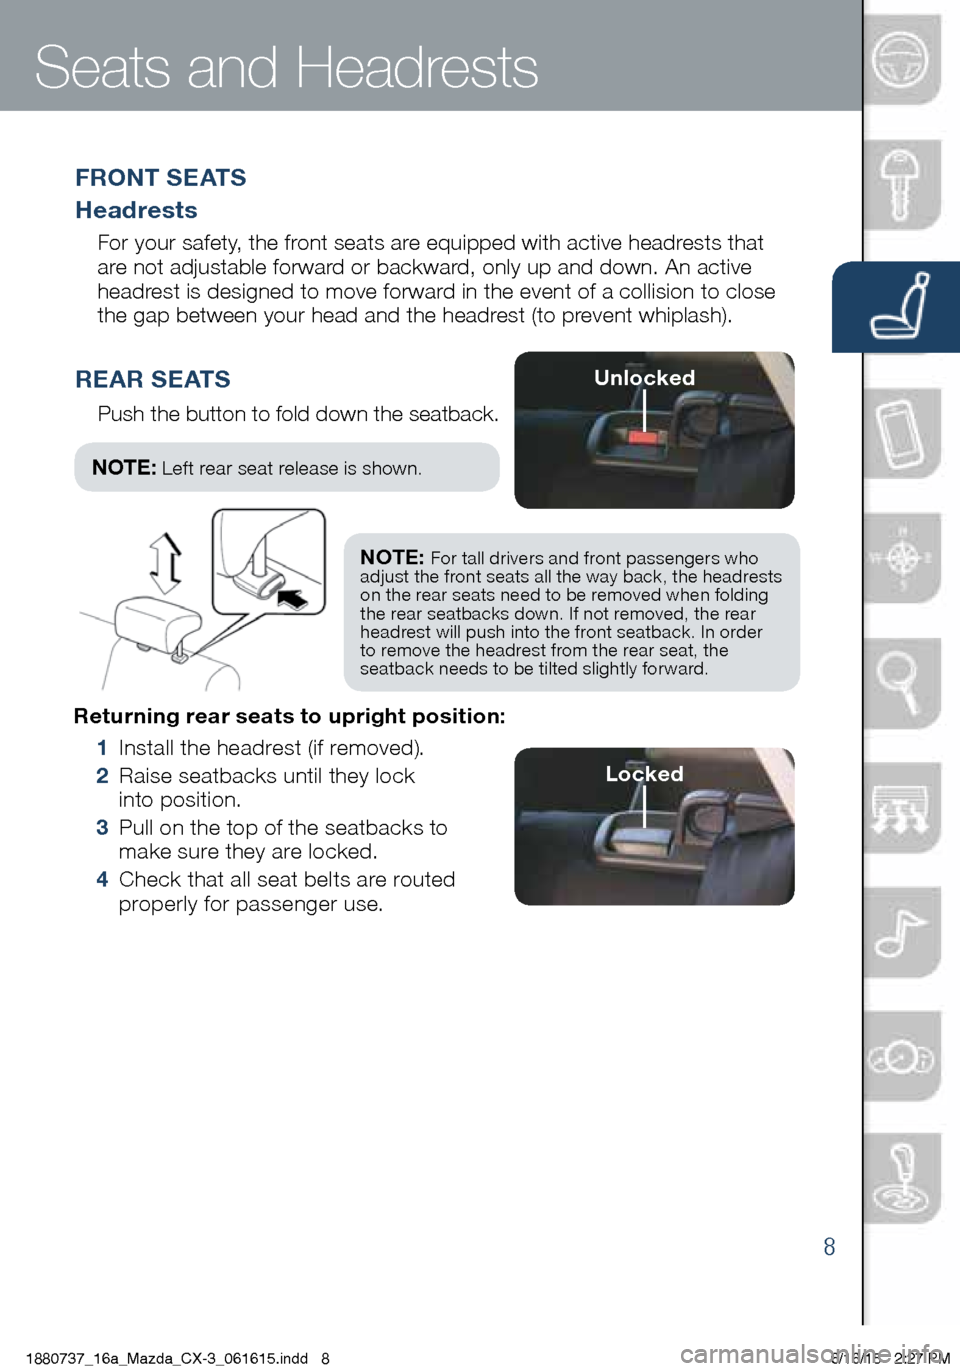 MAZDA MODEL CX-3 2016  Smart Start Guide (in English) 8
Returning rear seats to upright position:
 1 Install the headrest (if removed).
    2   Raise seatbacks until they lock   
into position.
  3   Pull on the top of the seatbacks to 
make sure they ar